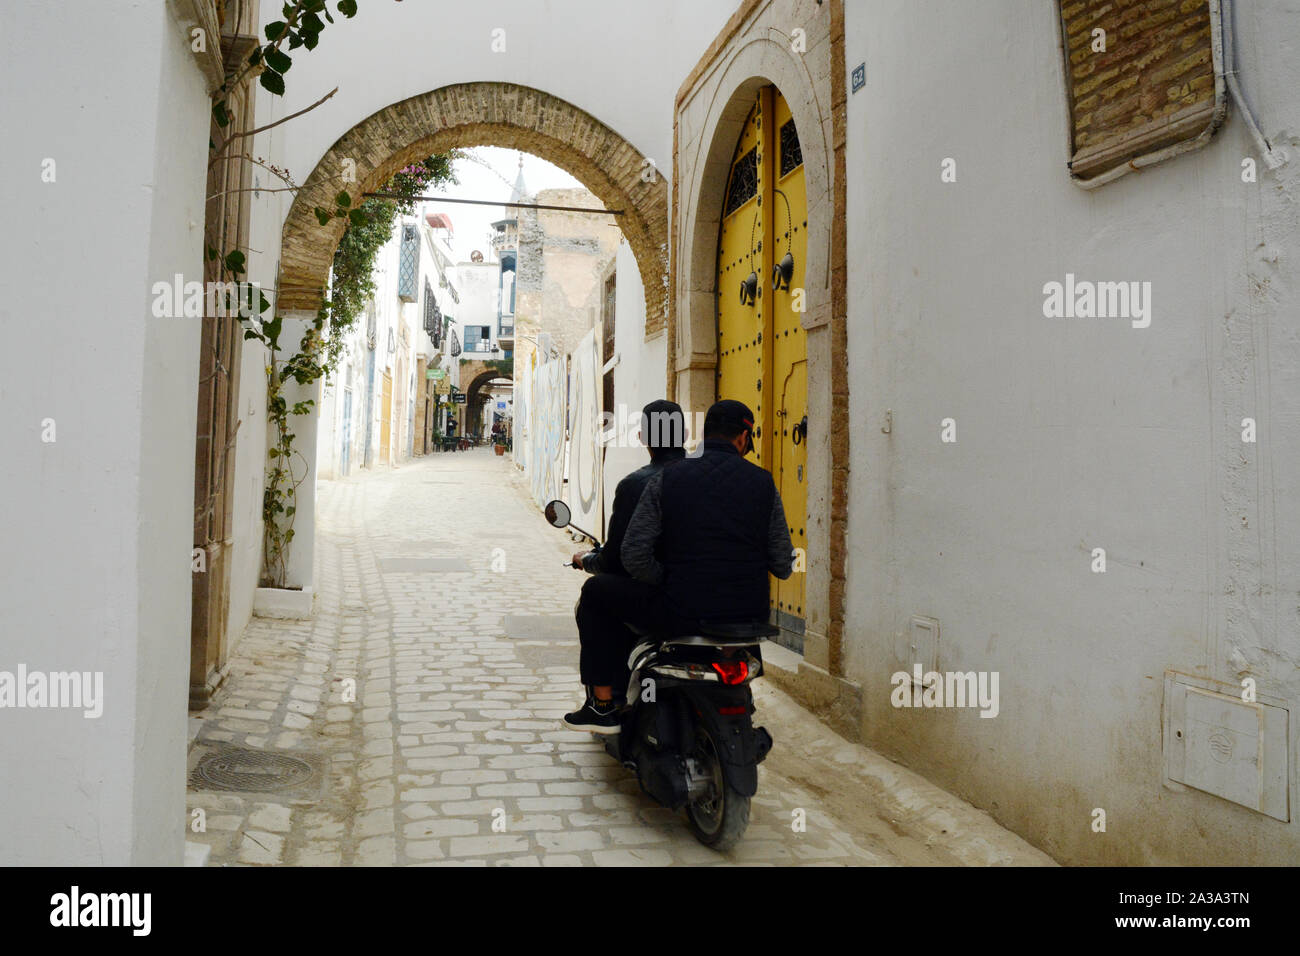 Two young Tunisian men riding on a motorbike through the pedestrian streets of the Hafsia quarter of the Medina (old city) of Tunis, Tunisia. Stock Photo